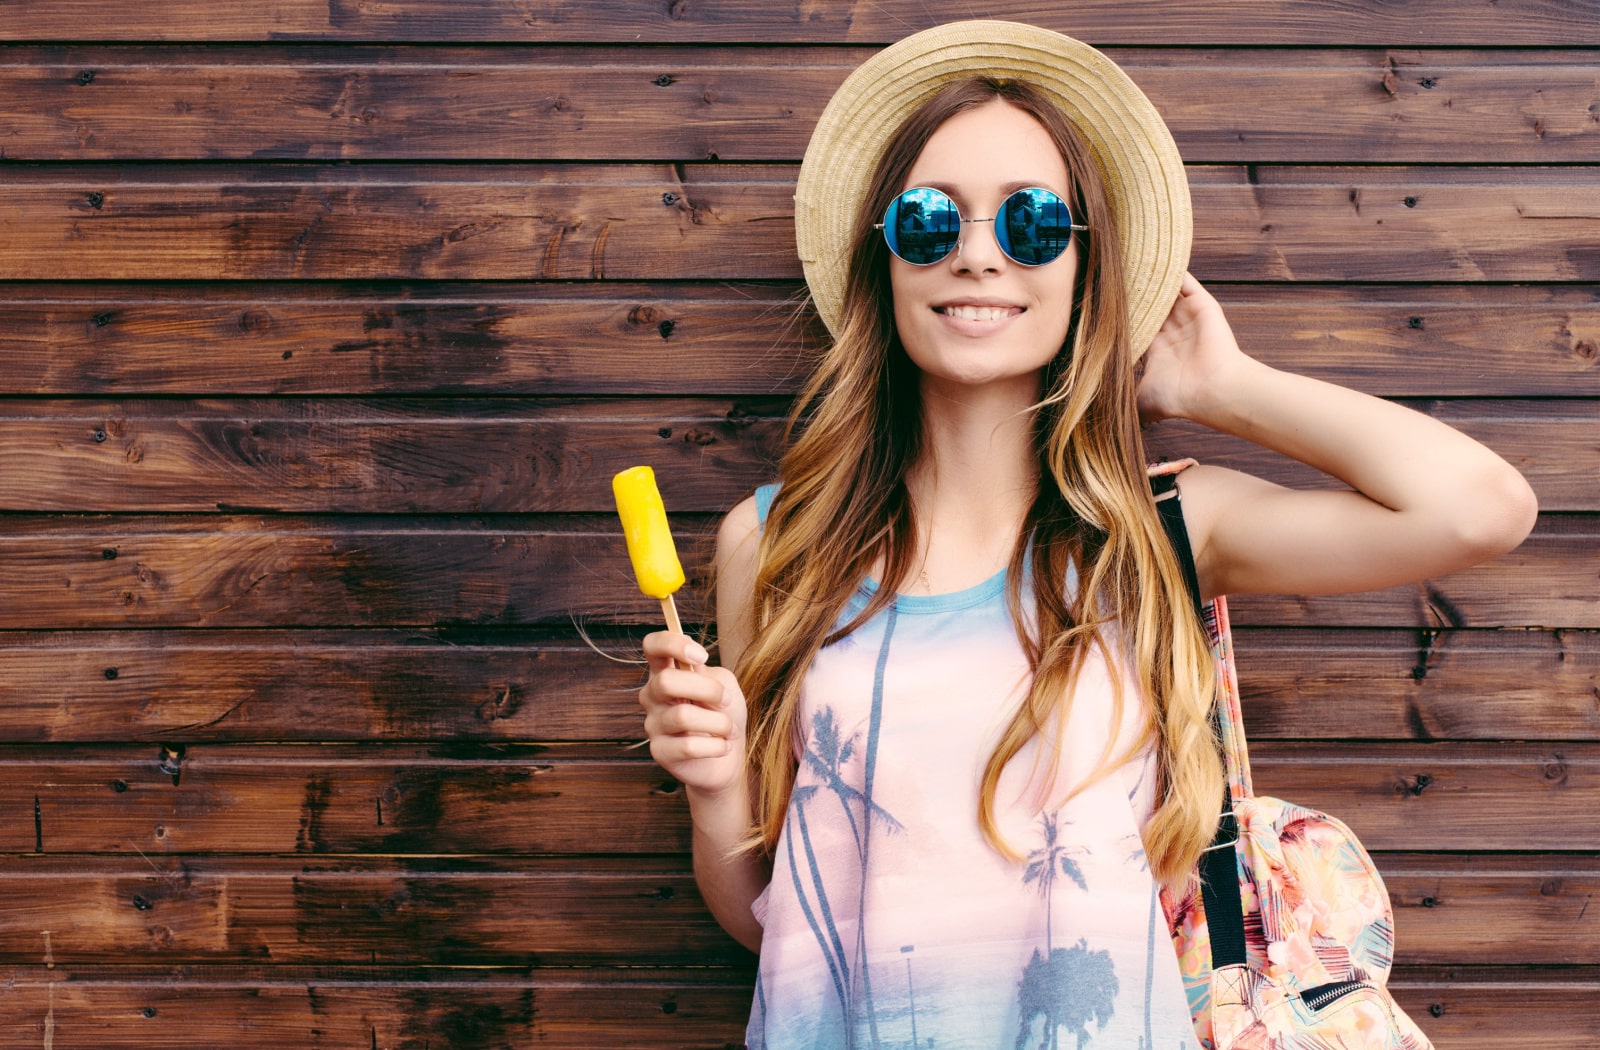 A woman standing against a wood panel background, holding onto a popsicle stick. She's holding onto her sun hat with her other hand, and wearing polarized sunglasses.